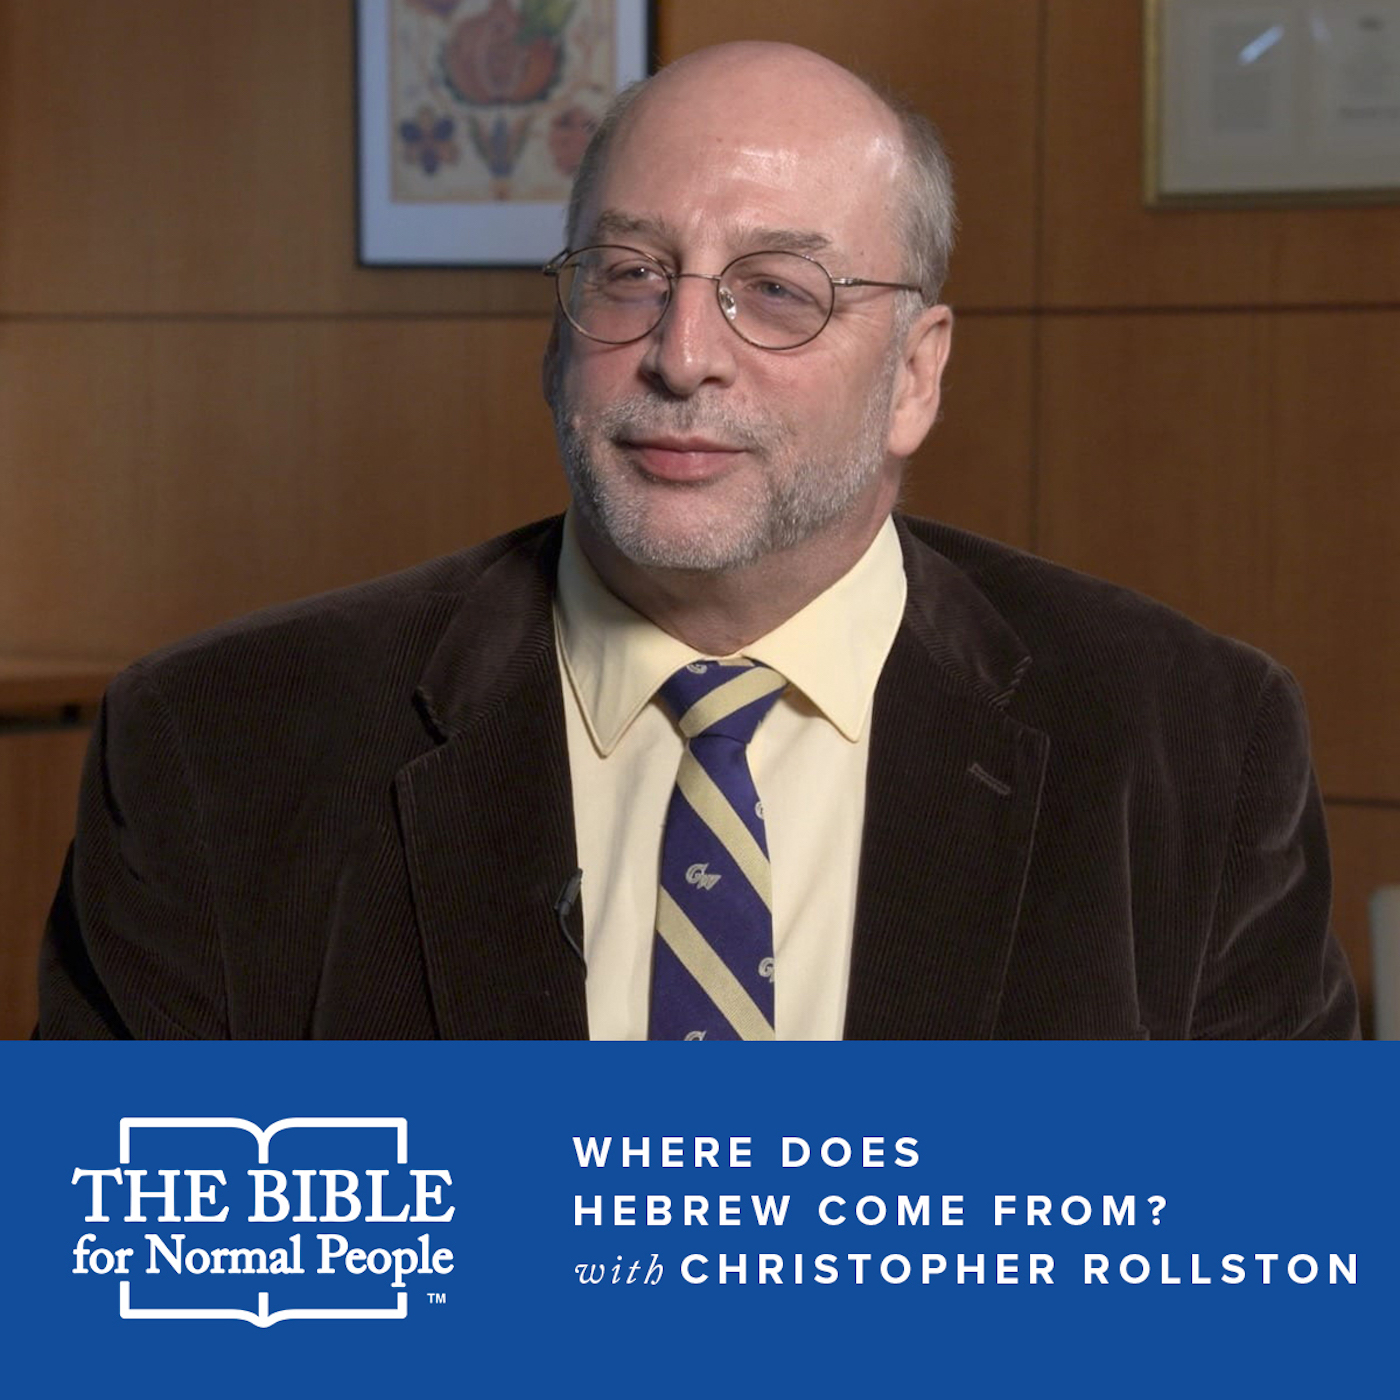 Interview with Christopher Rollston: Where Does Hebrew Come From?